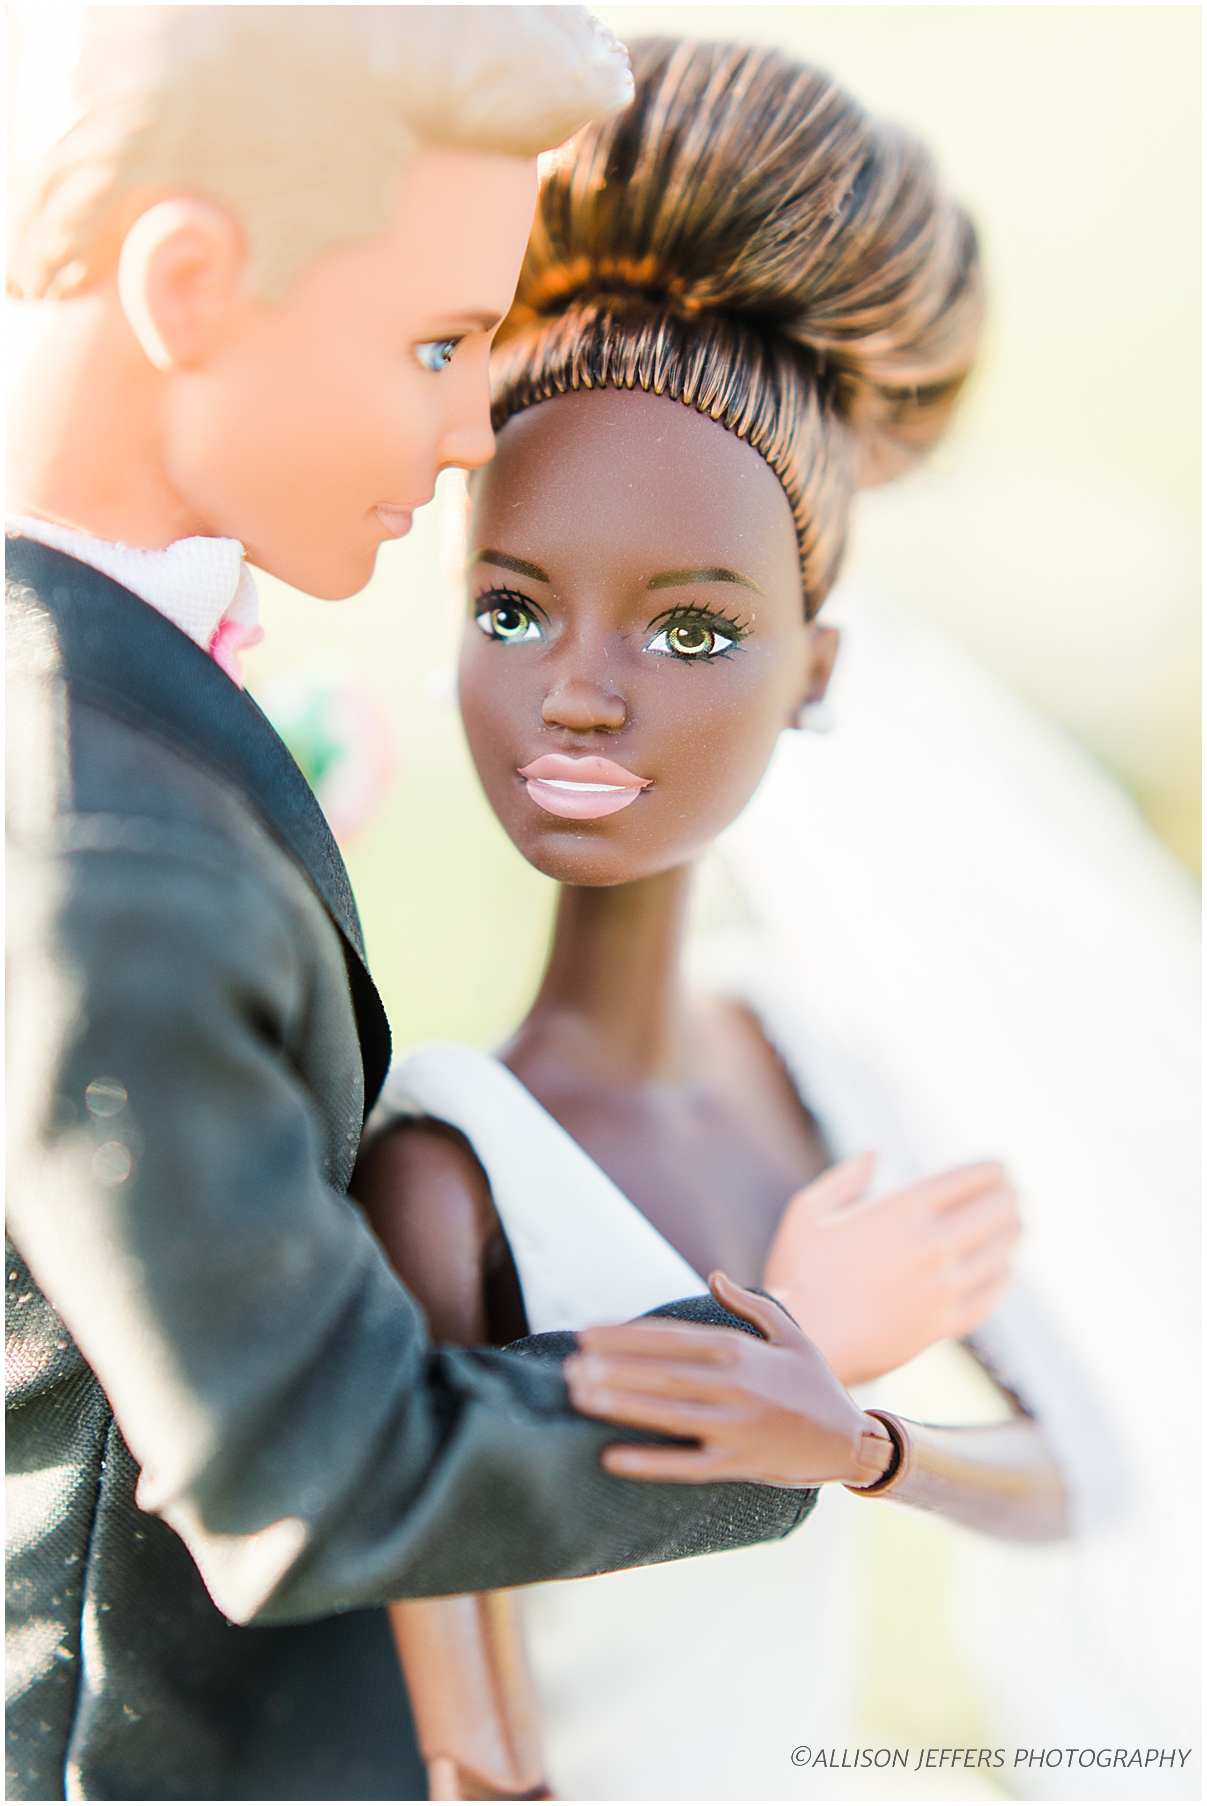 Barbie and Ken dream wedding photography styled shoot by Allison Jeffers Photography 0026